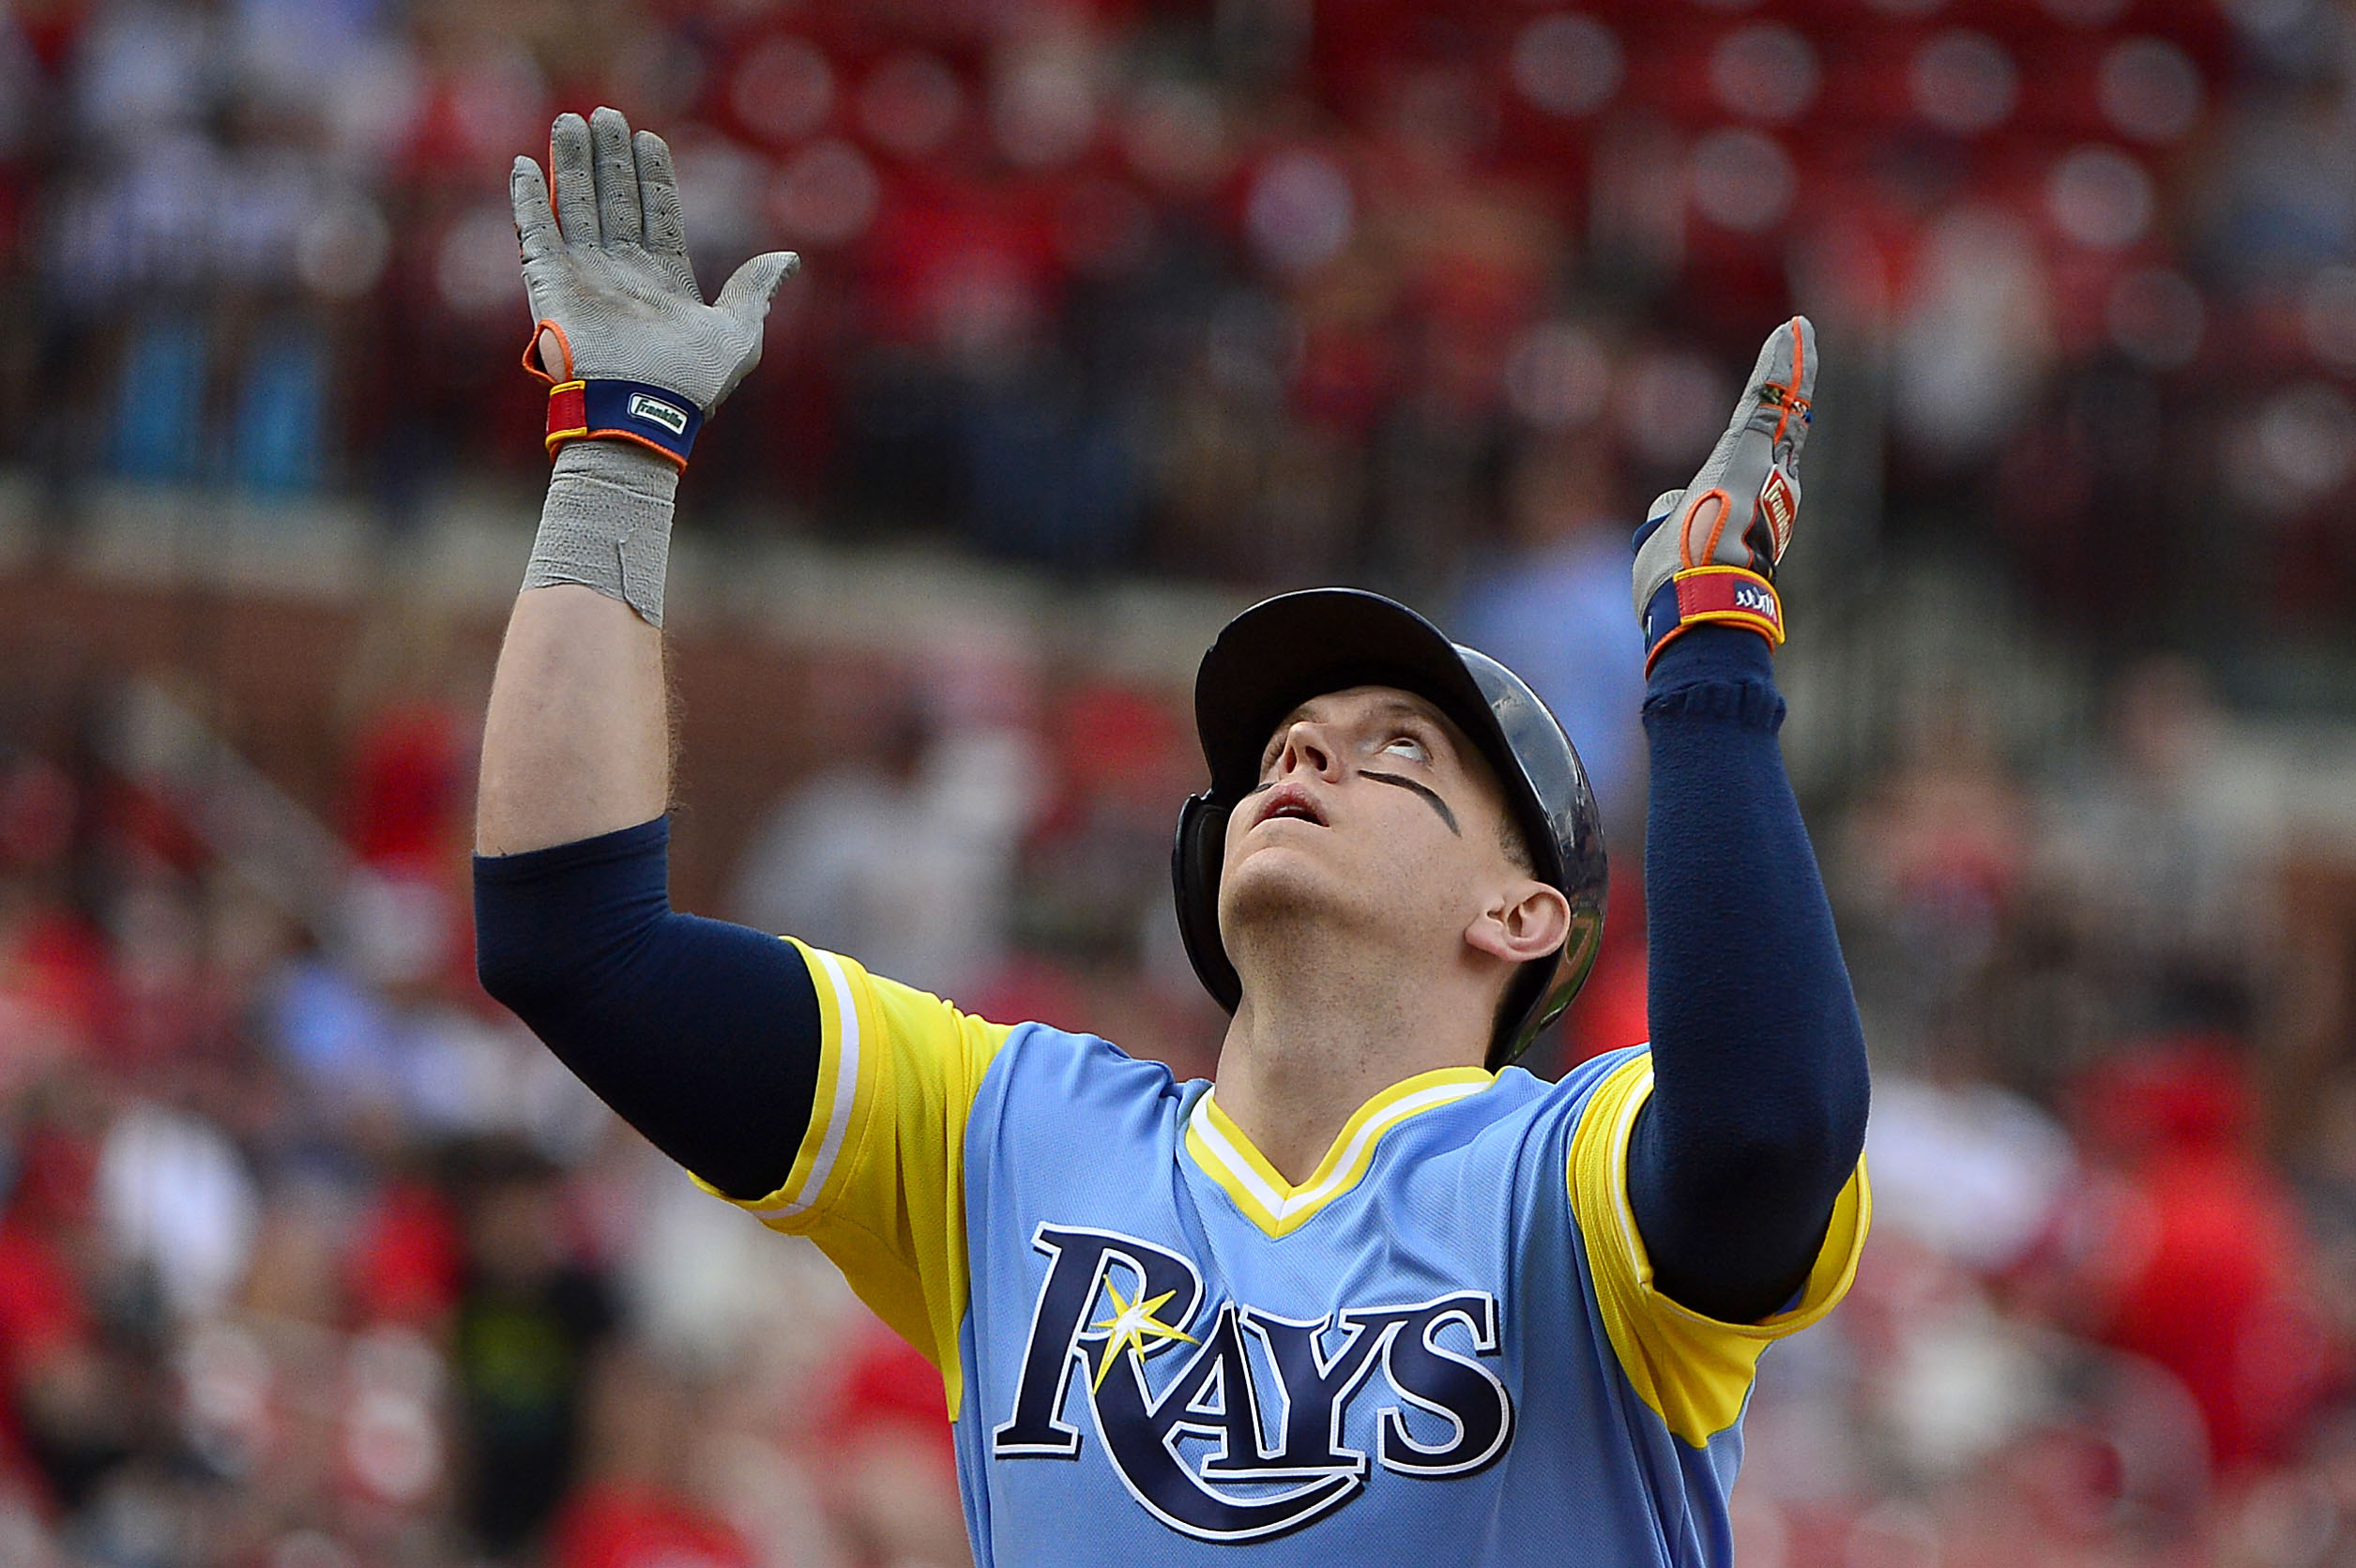 Aug 27, 2017; St. Louis, MO, USA; Tampa Bay Rays first baseman Logan Morrison (7) celebrates after hitting a solo home run off of St. Louis Cardinals relief pitcher Sam Tuivailala (not pictured) during the tenth inning at Busch Stadium. Mandatory Credit: Jeff Curry-USA TODAY Sports